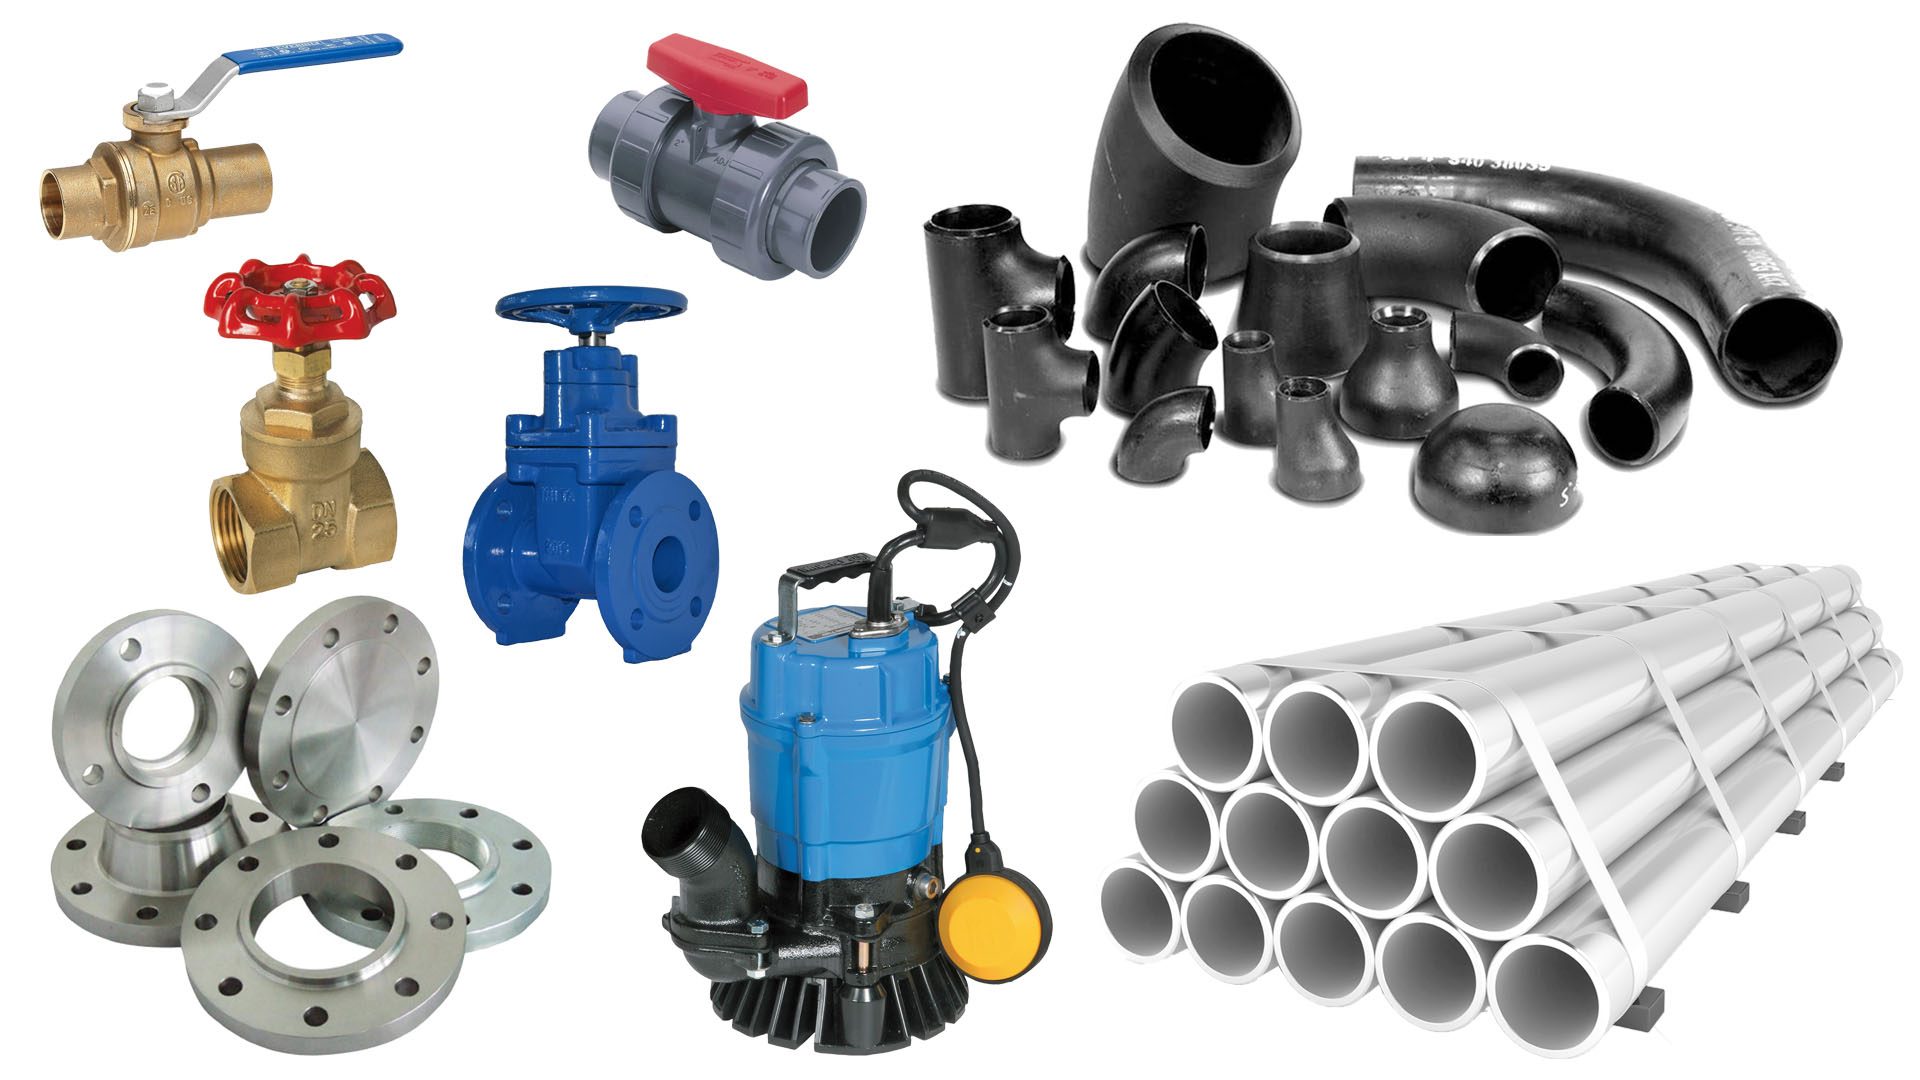 Valve Pump and Pipe Fitting